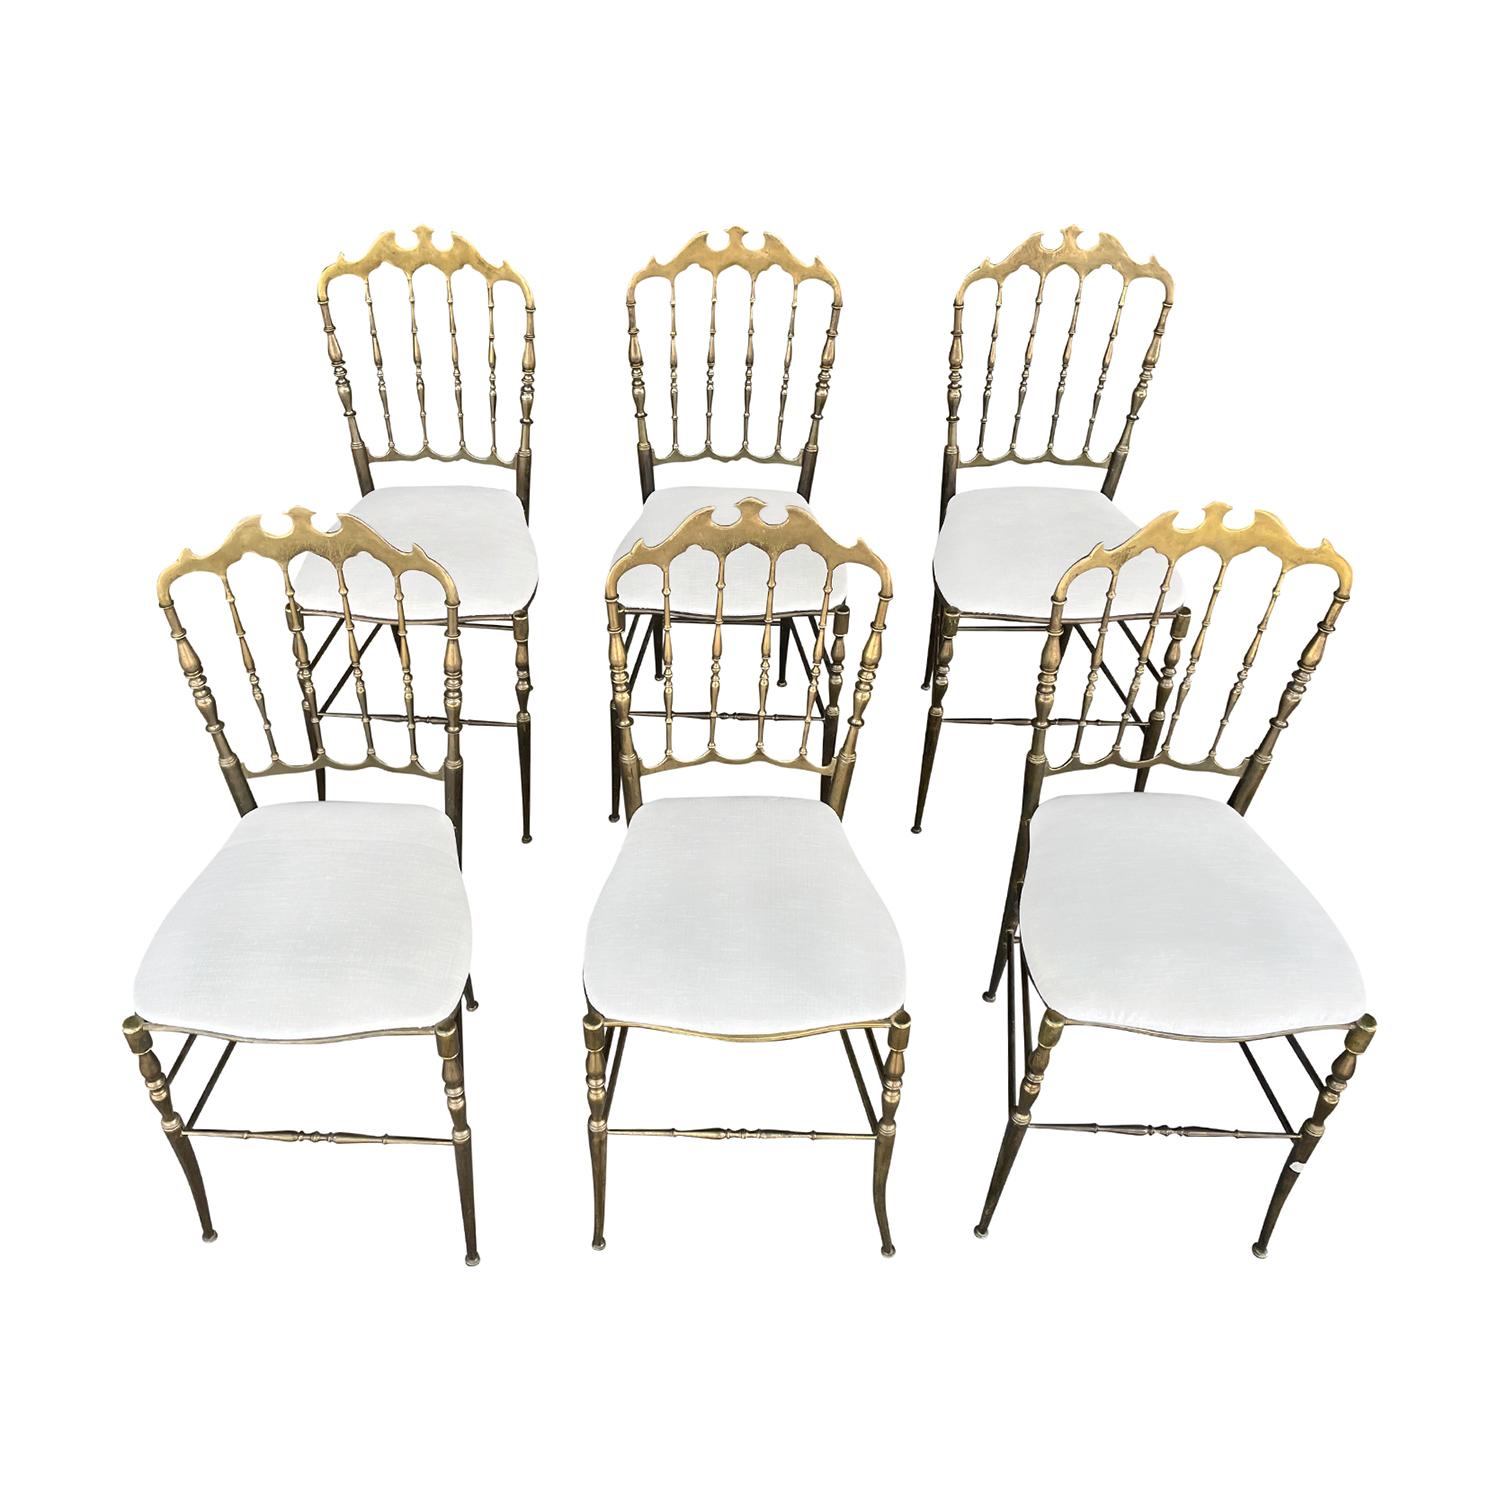 A vintage Art Deco Italian Modernist dining chairs made of hand crafted gilded brass, designed and produced in Chiavari in good condition. The legs of the small detailed side chairs are slightly splayed, connected with pairs of cross supports. Newly